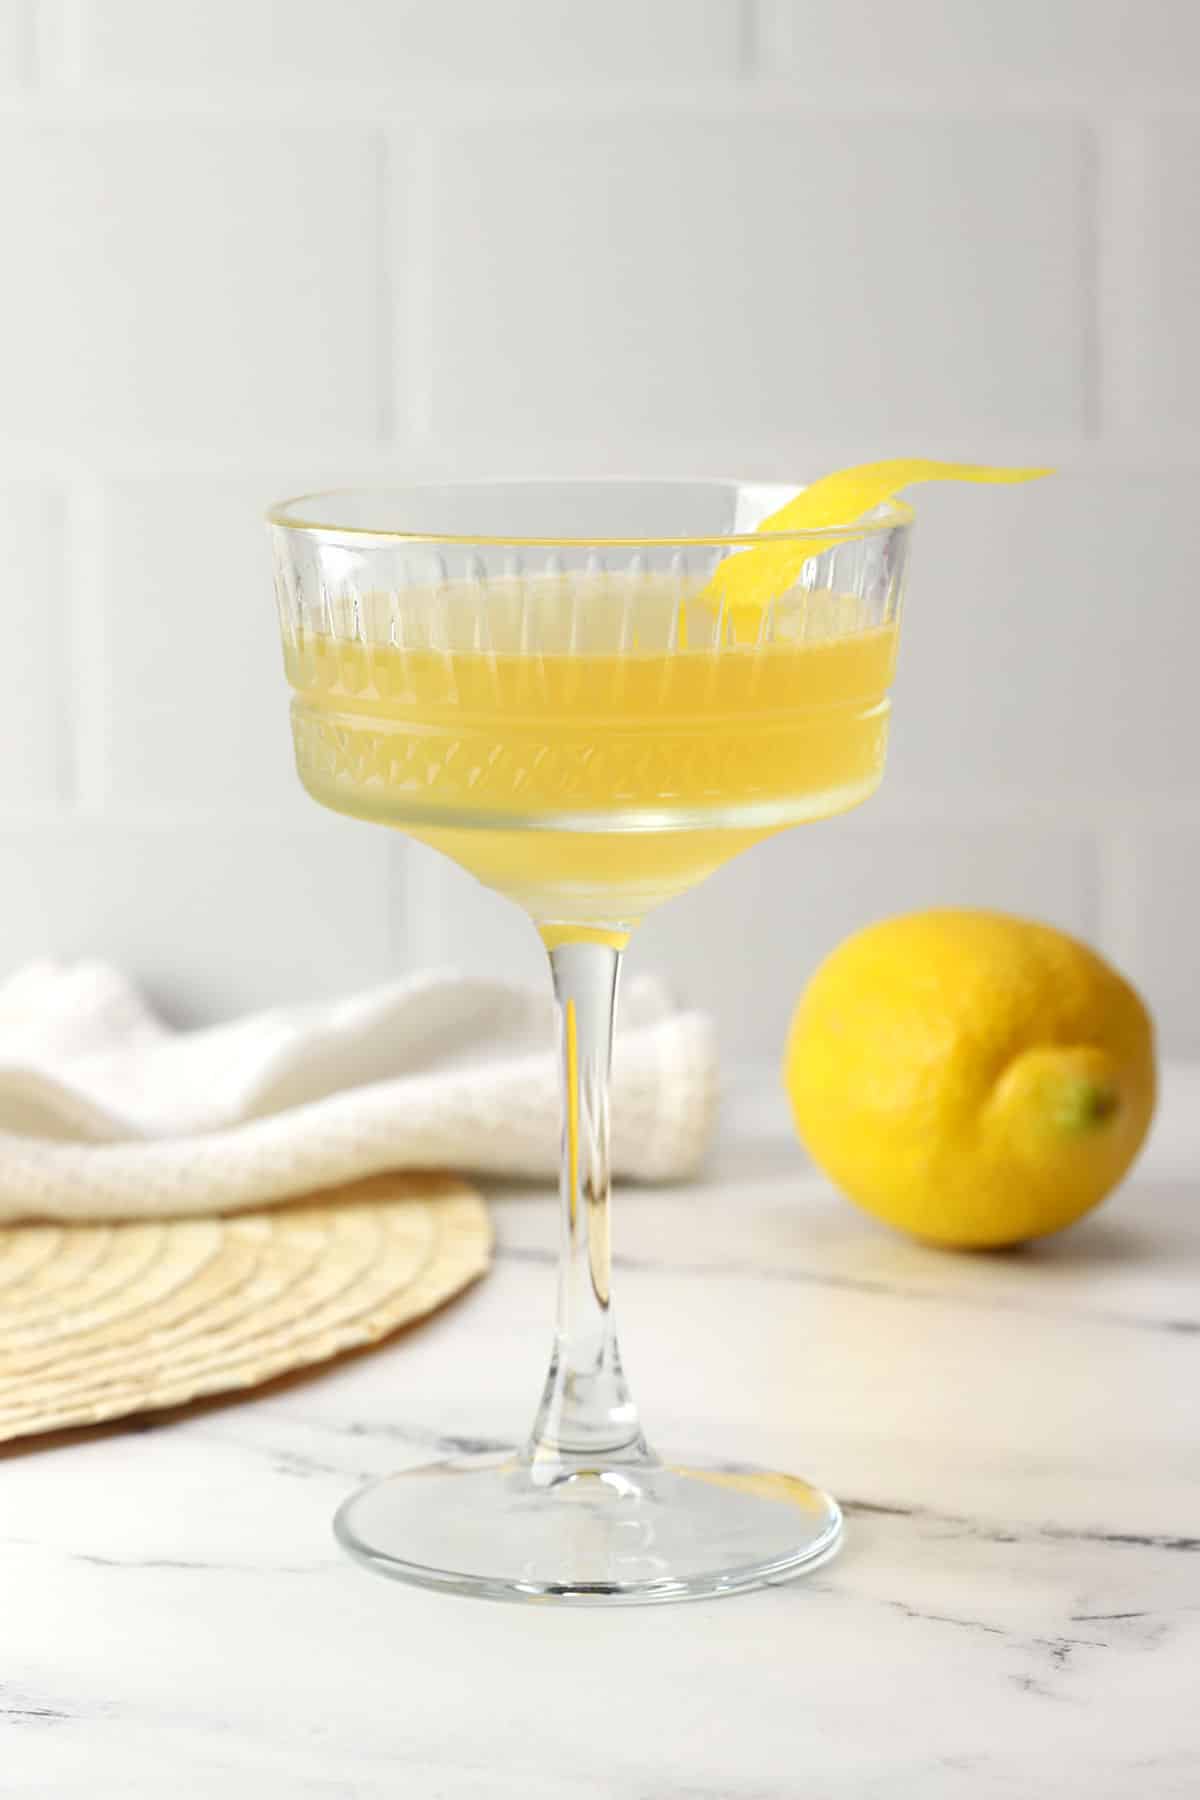 A coupe glass filled with bee's knees cocktail with a lemon peel garnish.